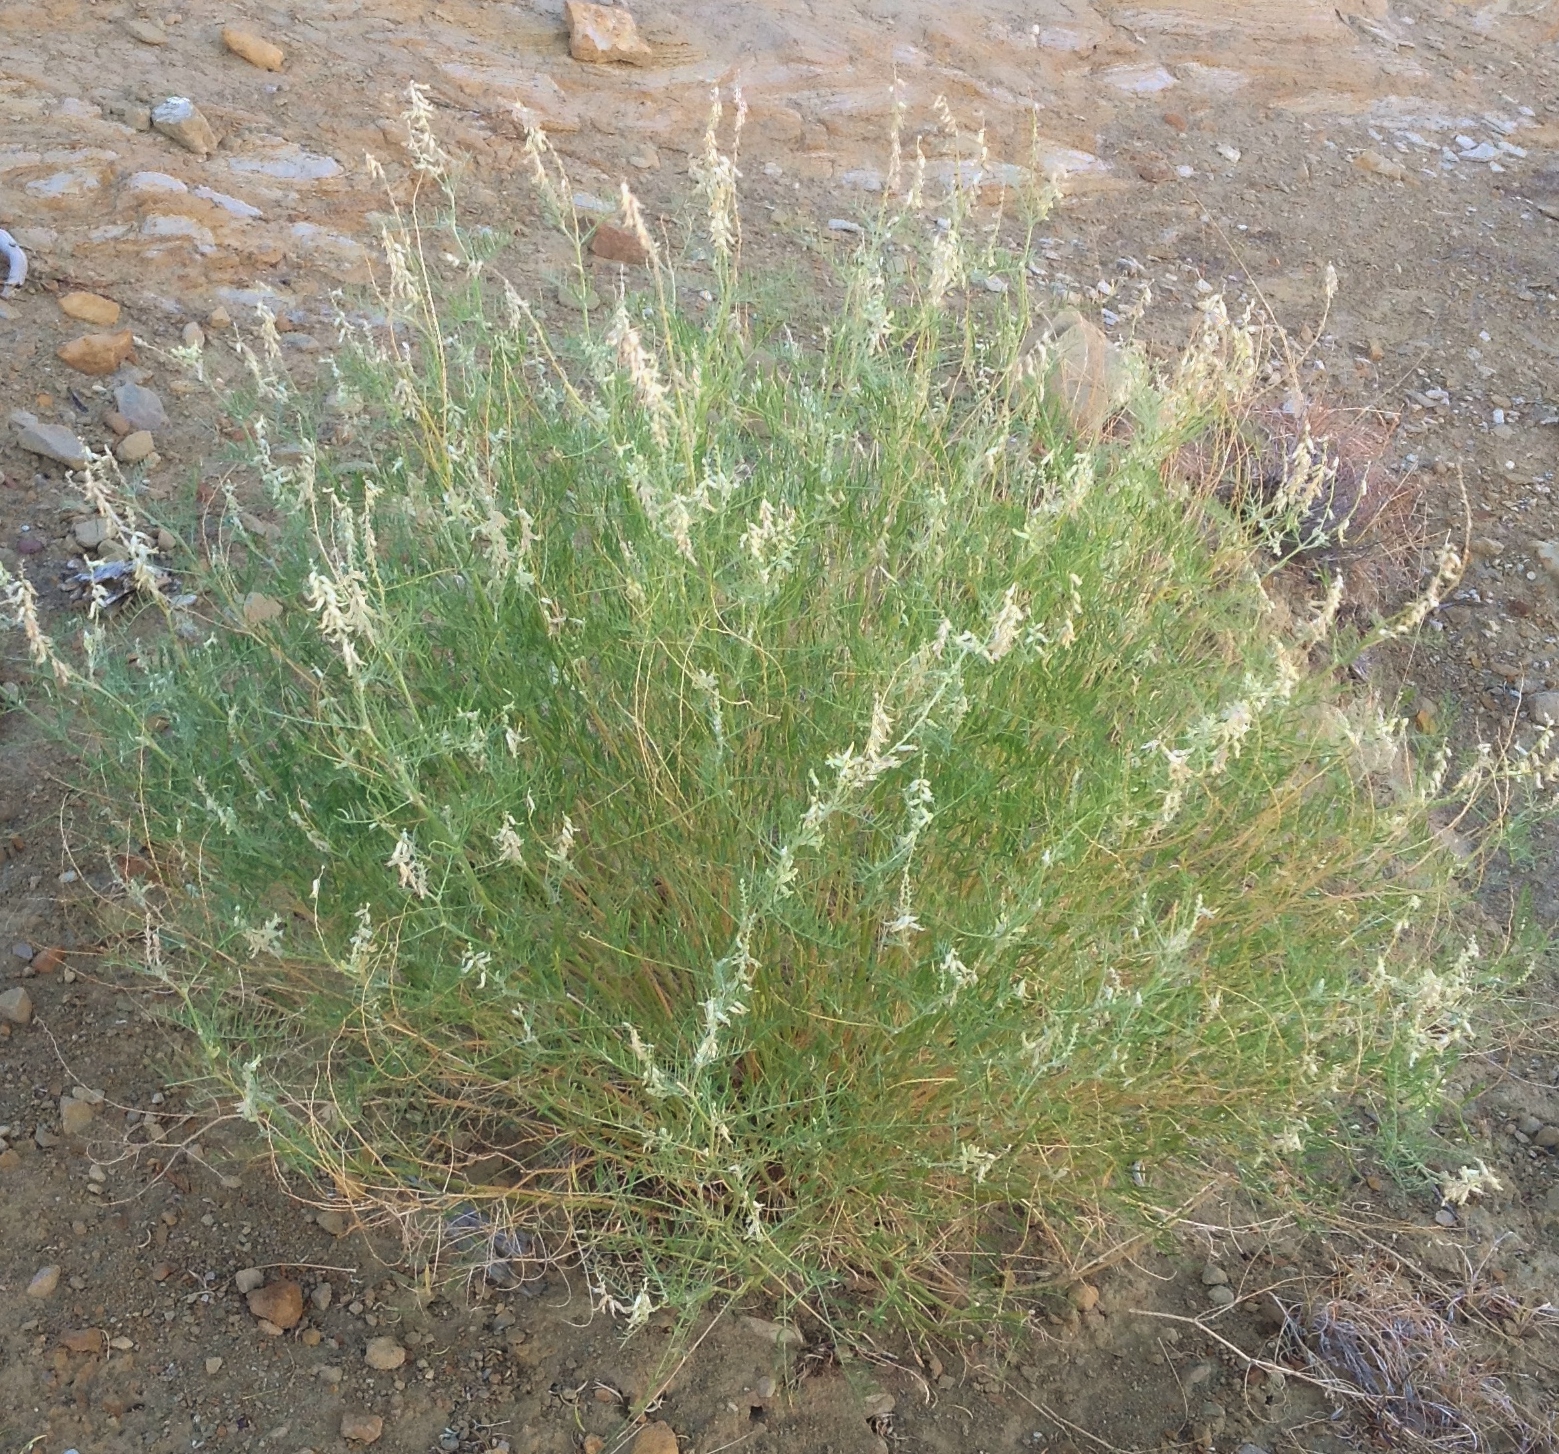 Bushy growth habit with foliage and buff-colored flowers